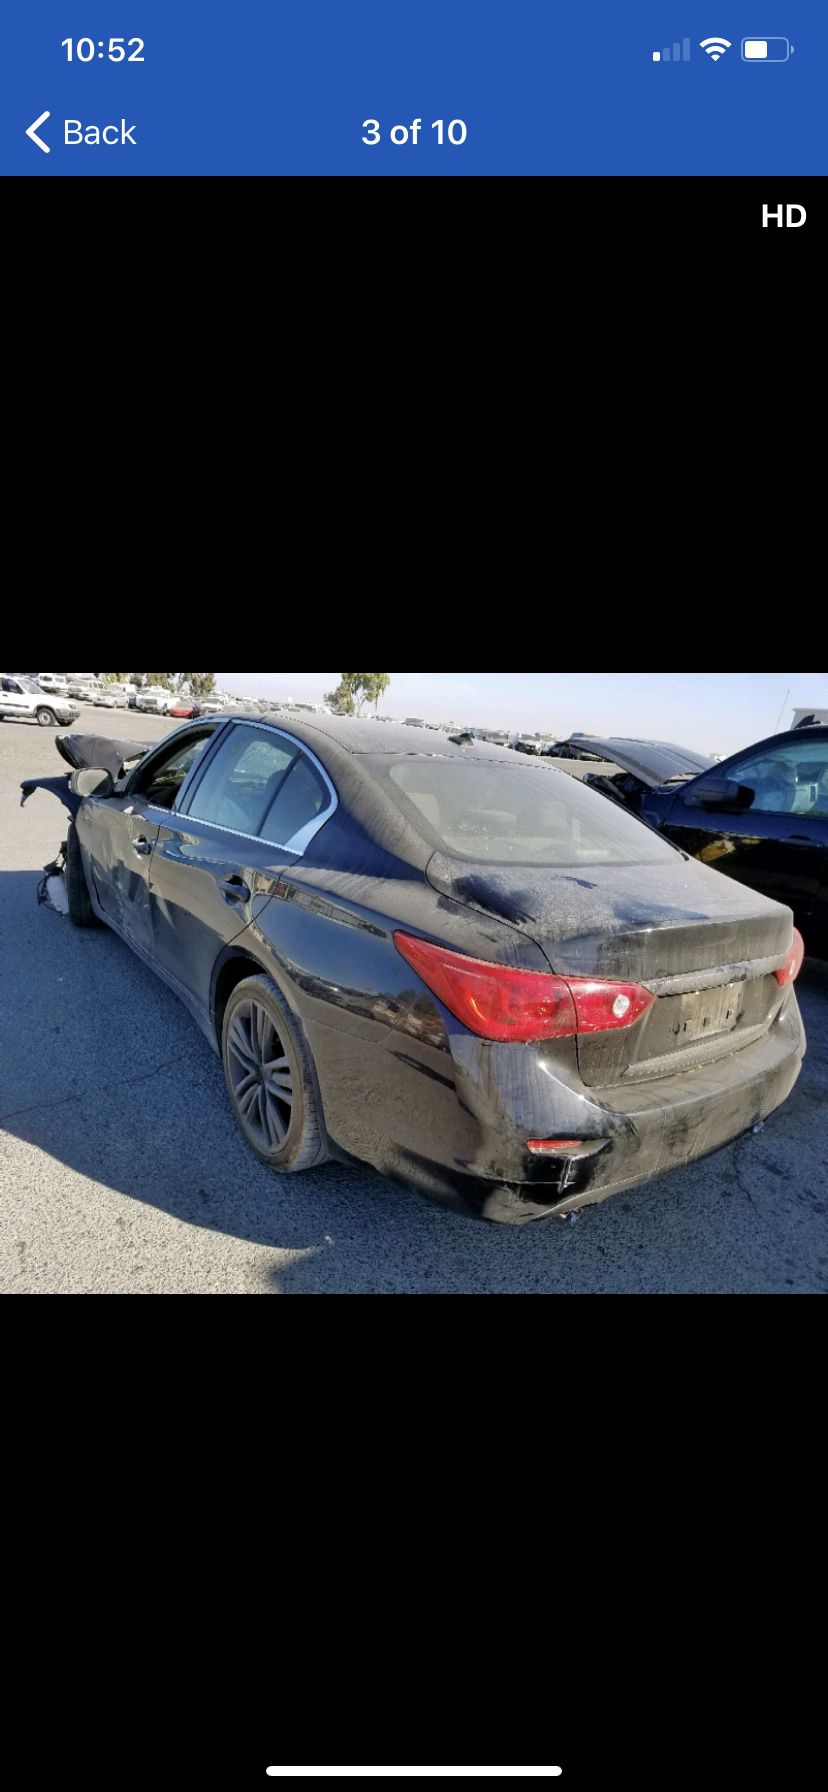 2014 Infiniti Q50 parting out parts car 14 15 16